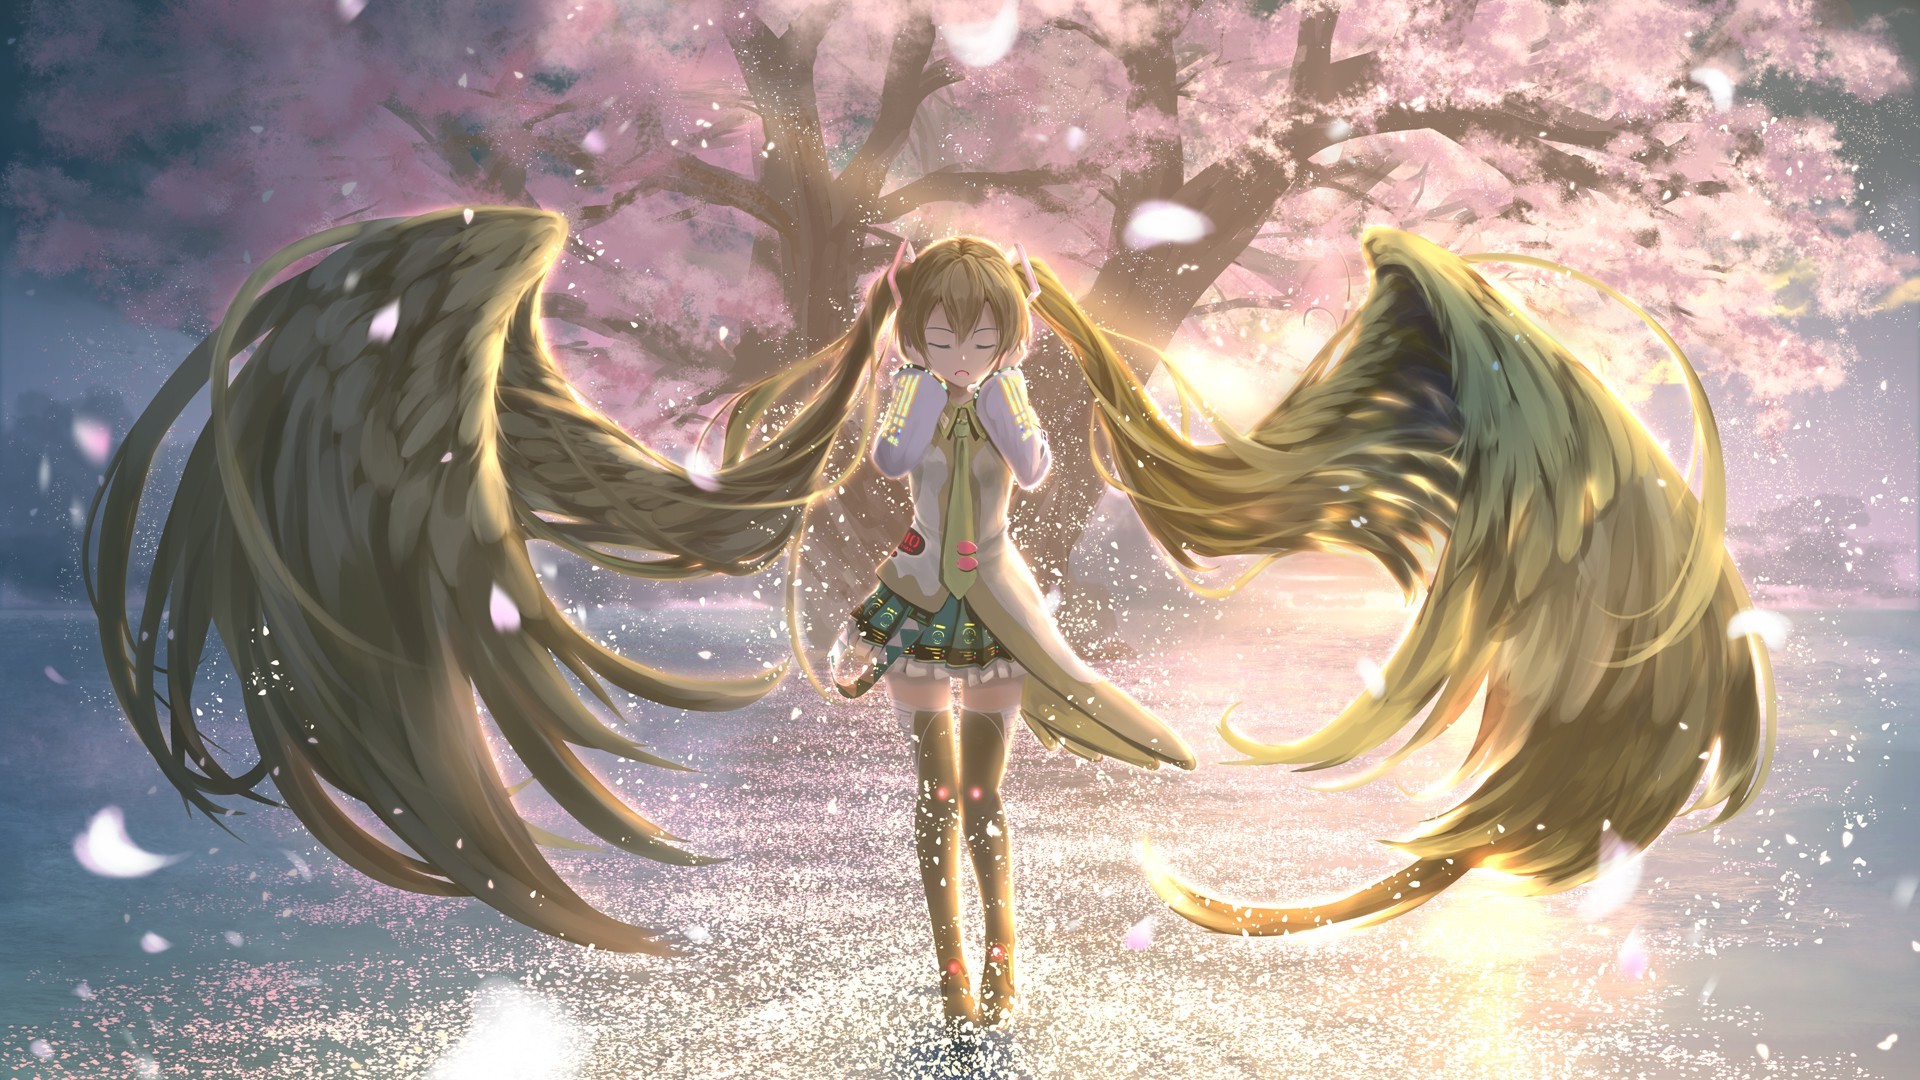 anime Girls, Vocaloid, Twintails, Hatsune Miku, Thigh highs, Skirt, Wings, Cherry Blossom, Closed Eyes Wallpaper